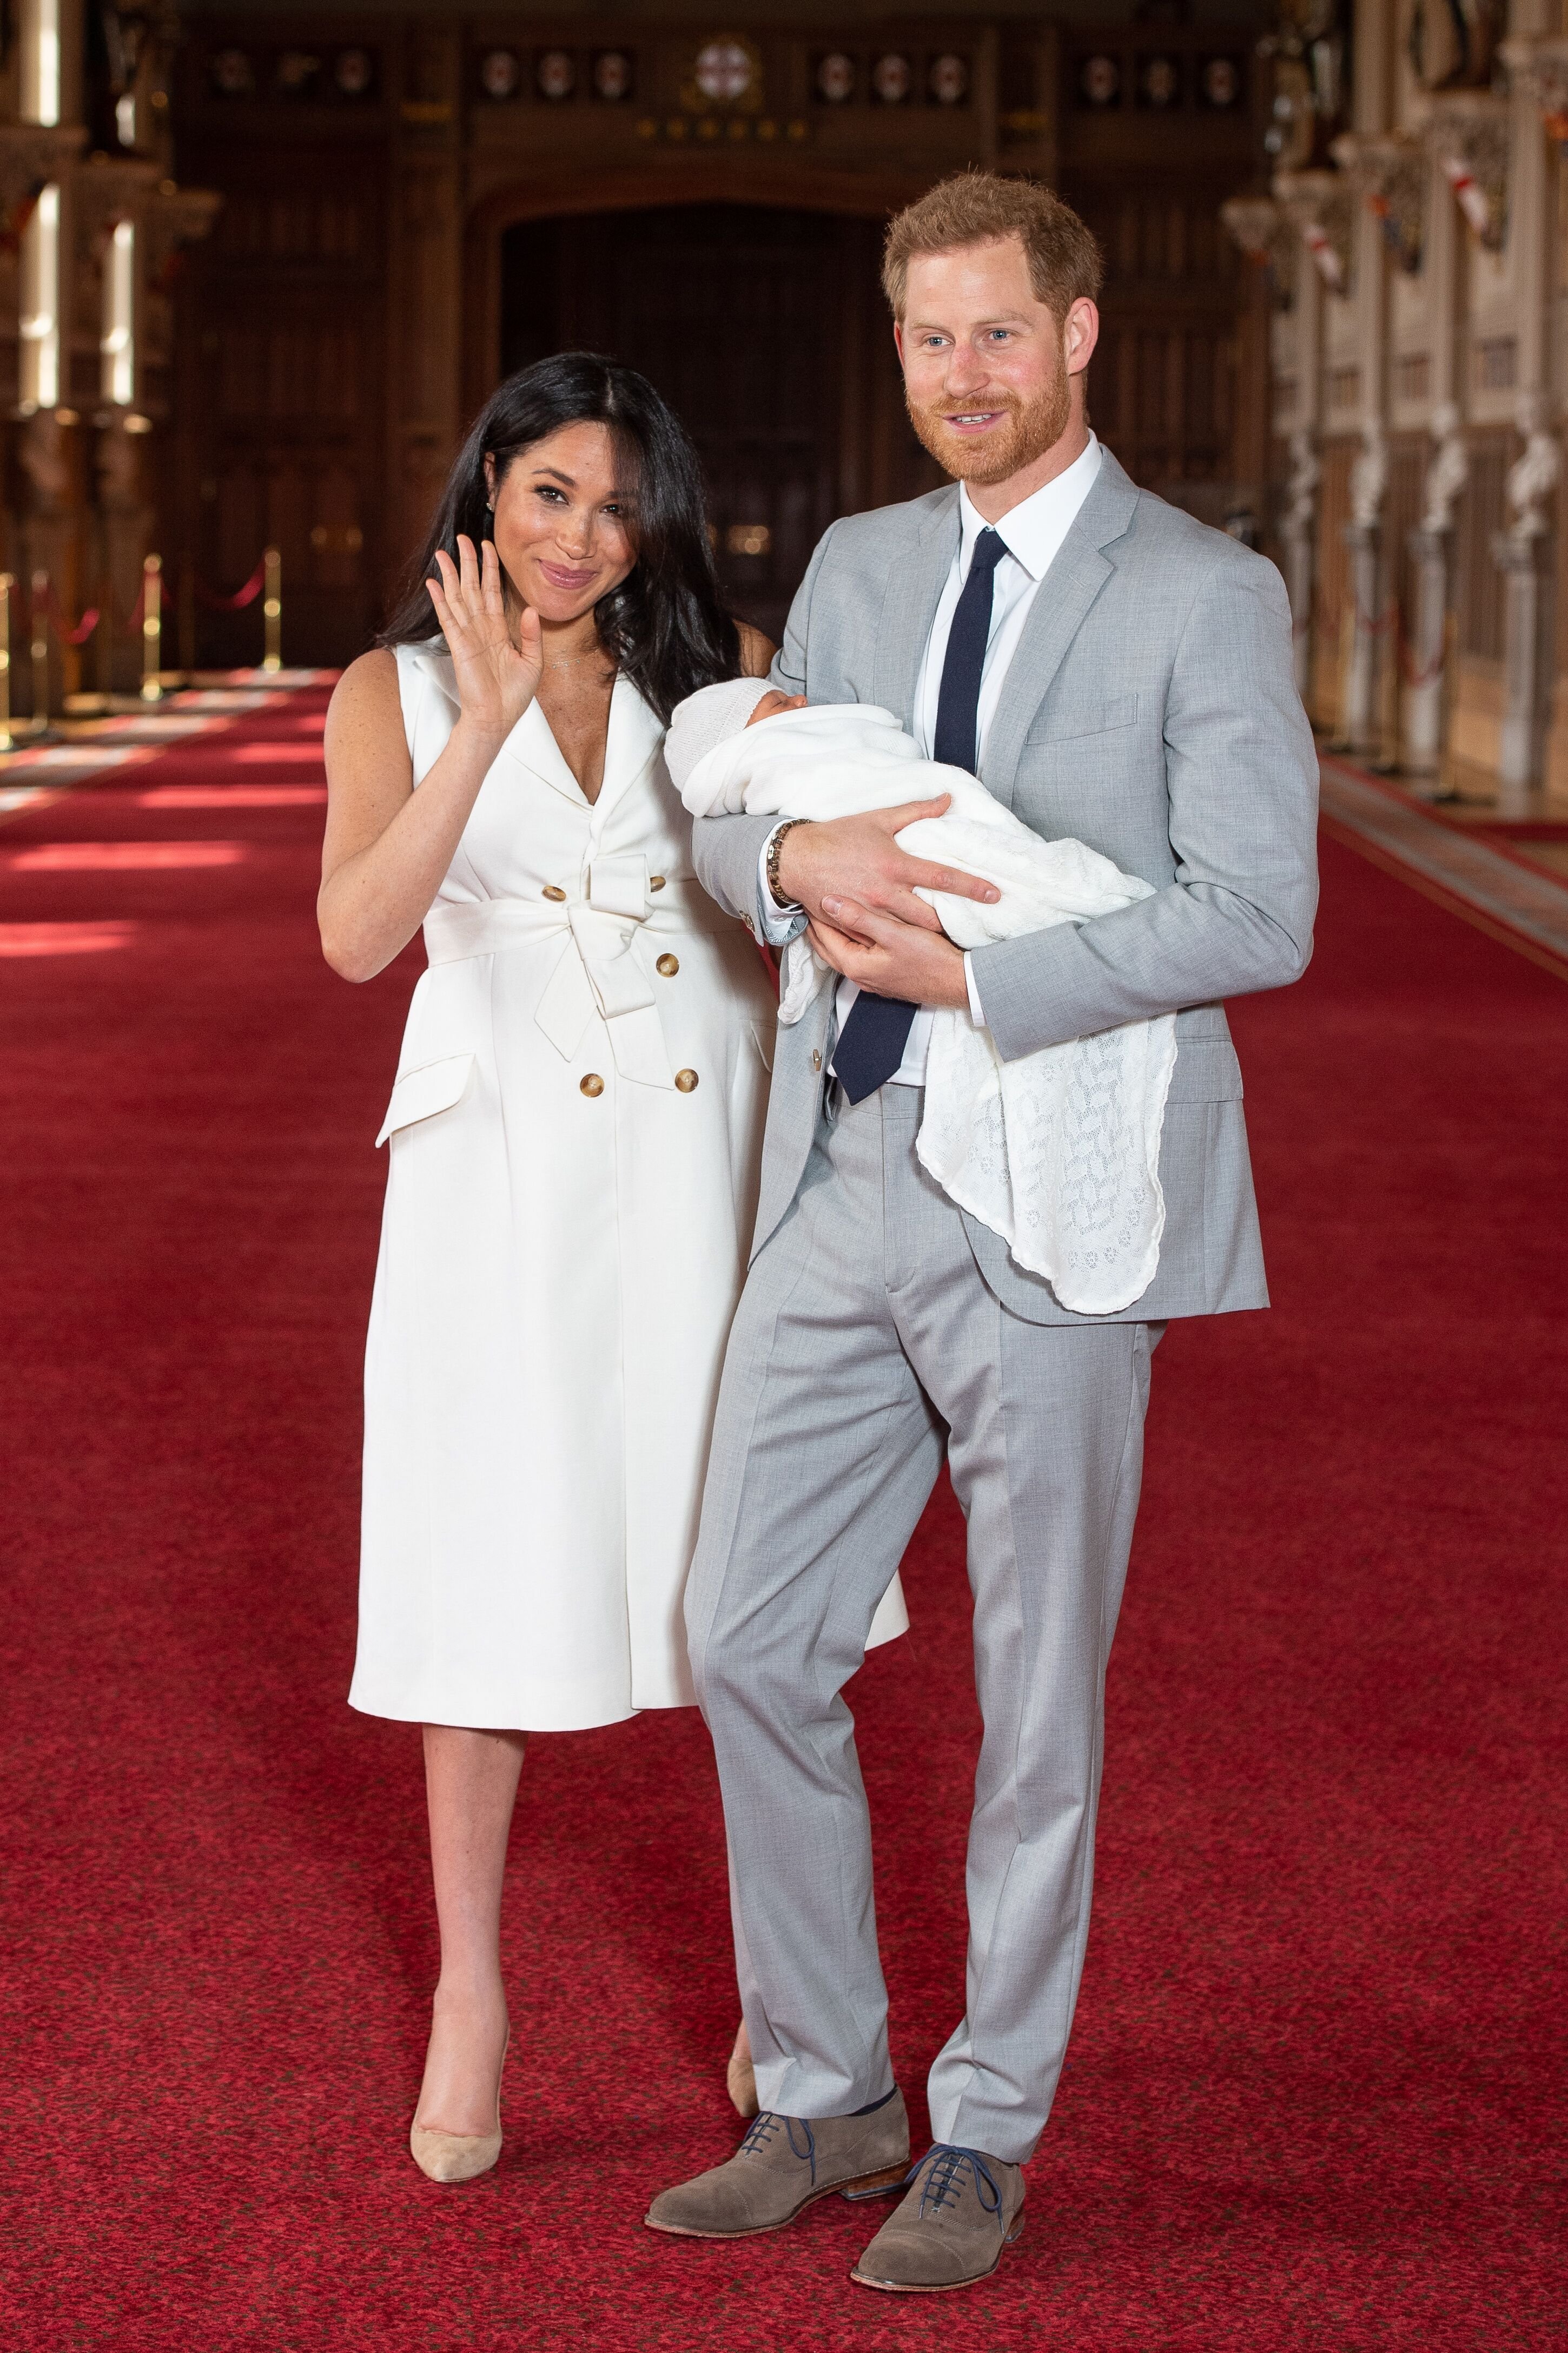 The Duke and Duchess of Sussex with Baby Archie | Source: Getty Images/GlobalImagesUkraine